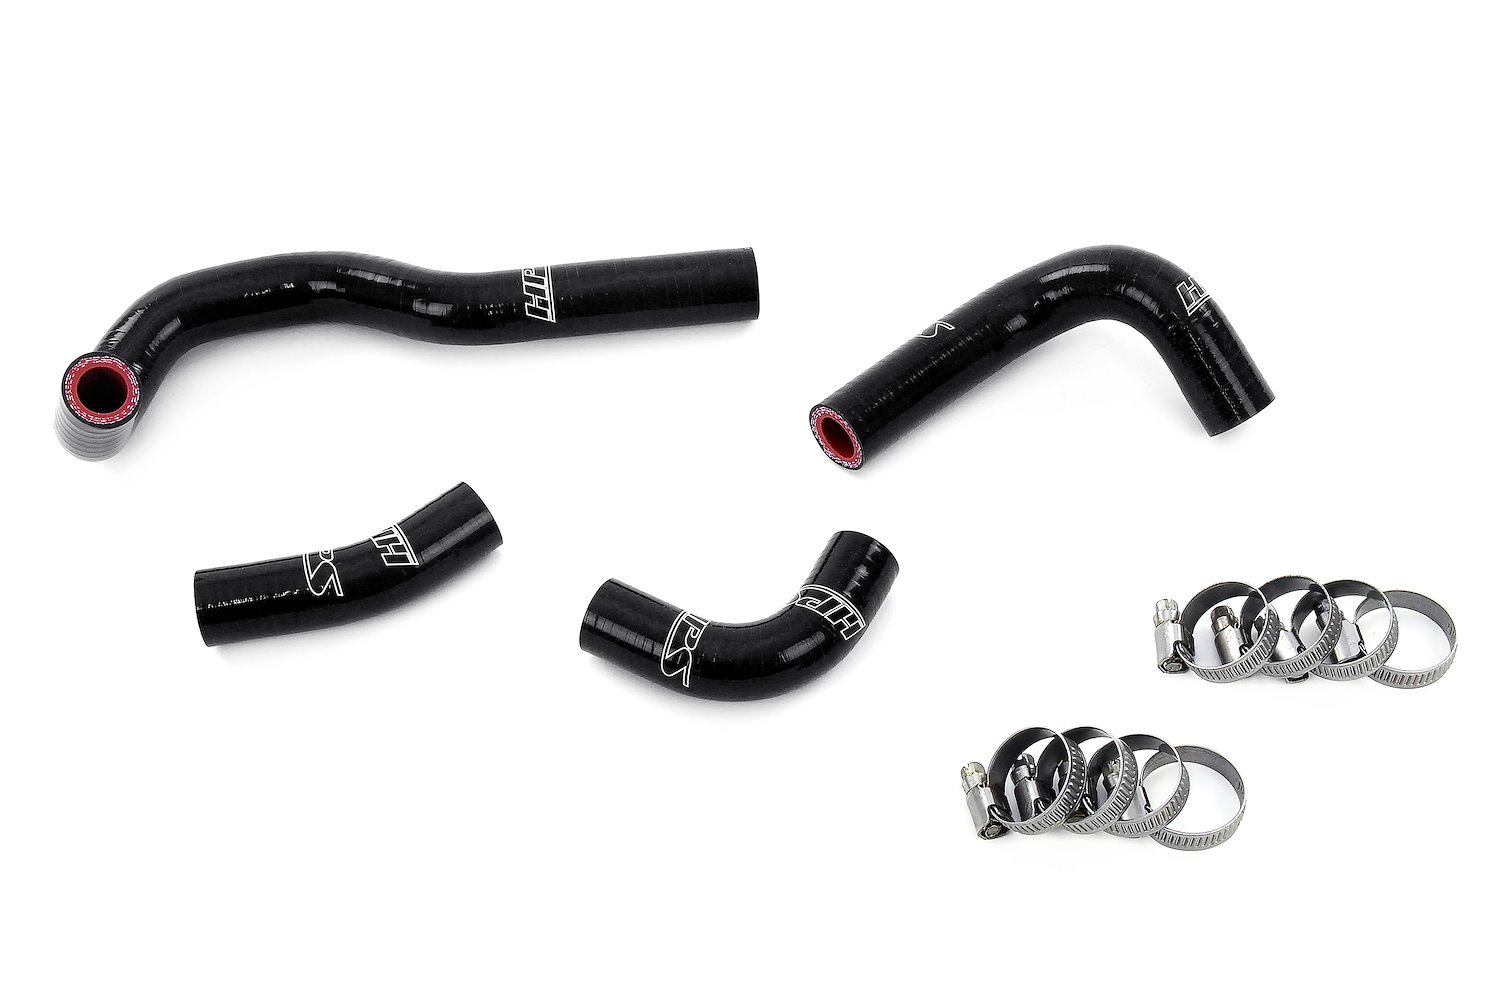 57-2146-BLK Heater Hose Kit, 3-Ply Reinforced Silicone, Replaces Rubber Heater Coolant Hoses